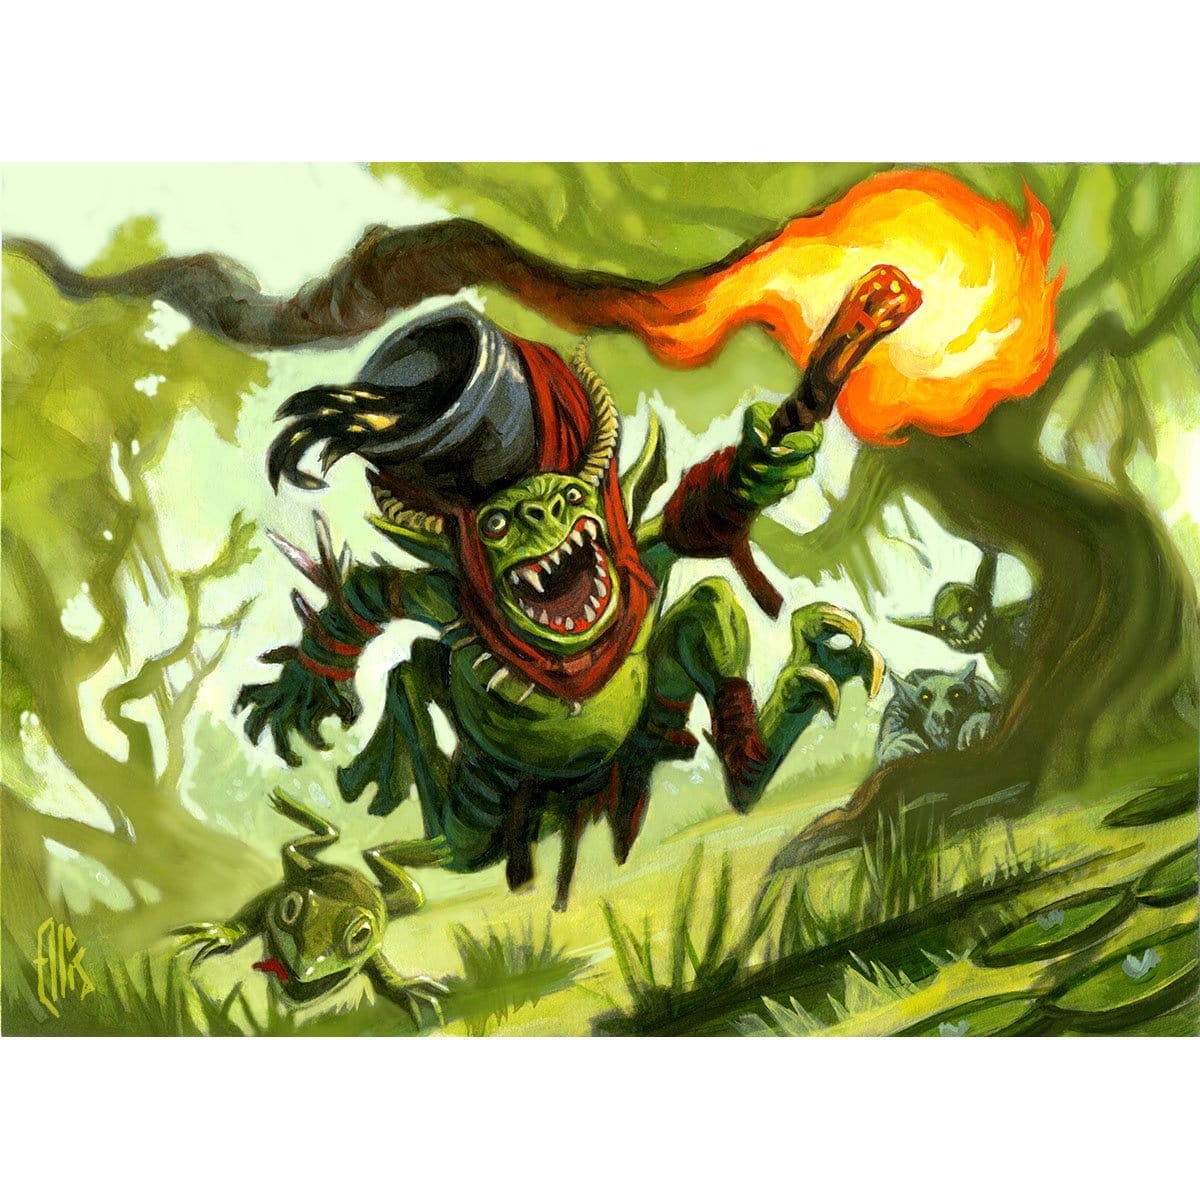 Mudbutton Torchrunner Print - Print - Original Magic Art - Accessories for Magic the Gathering and other card games